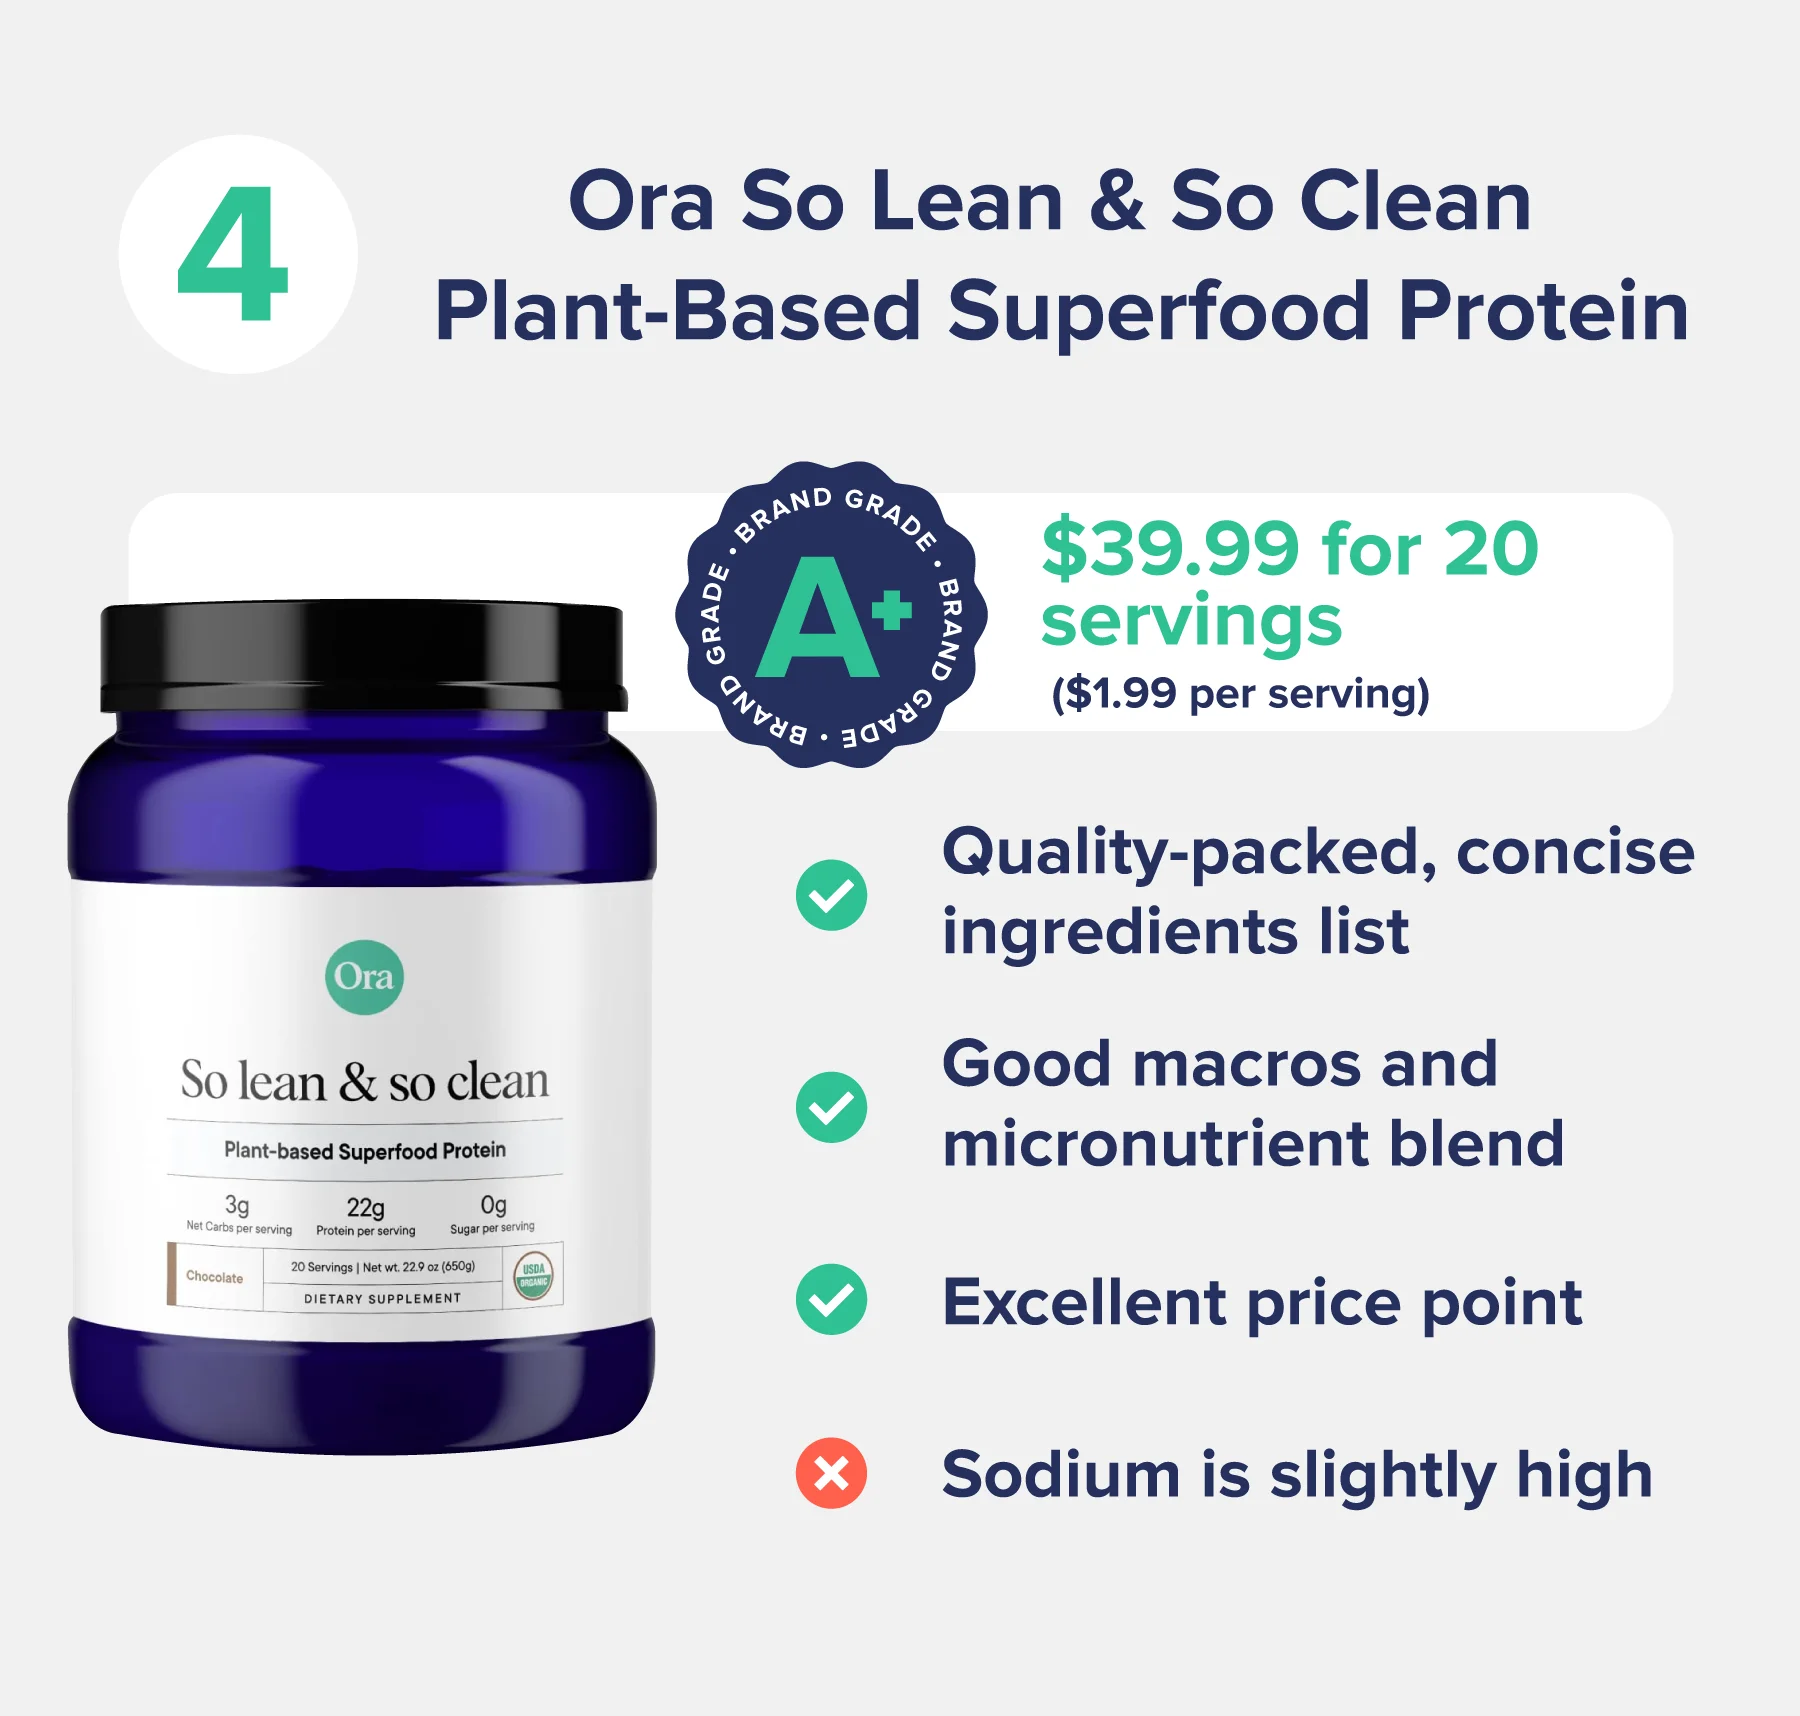 Ora So Lean & So Clean Plant-Based Superfood Protein with list of pros and cons